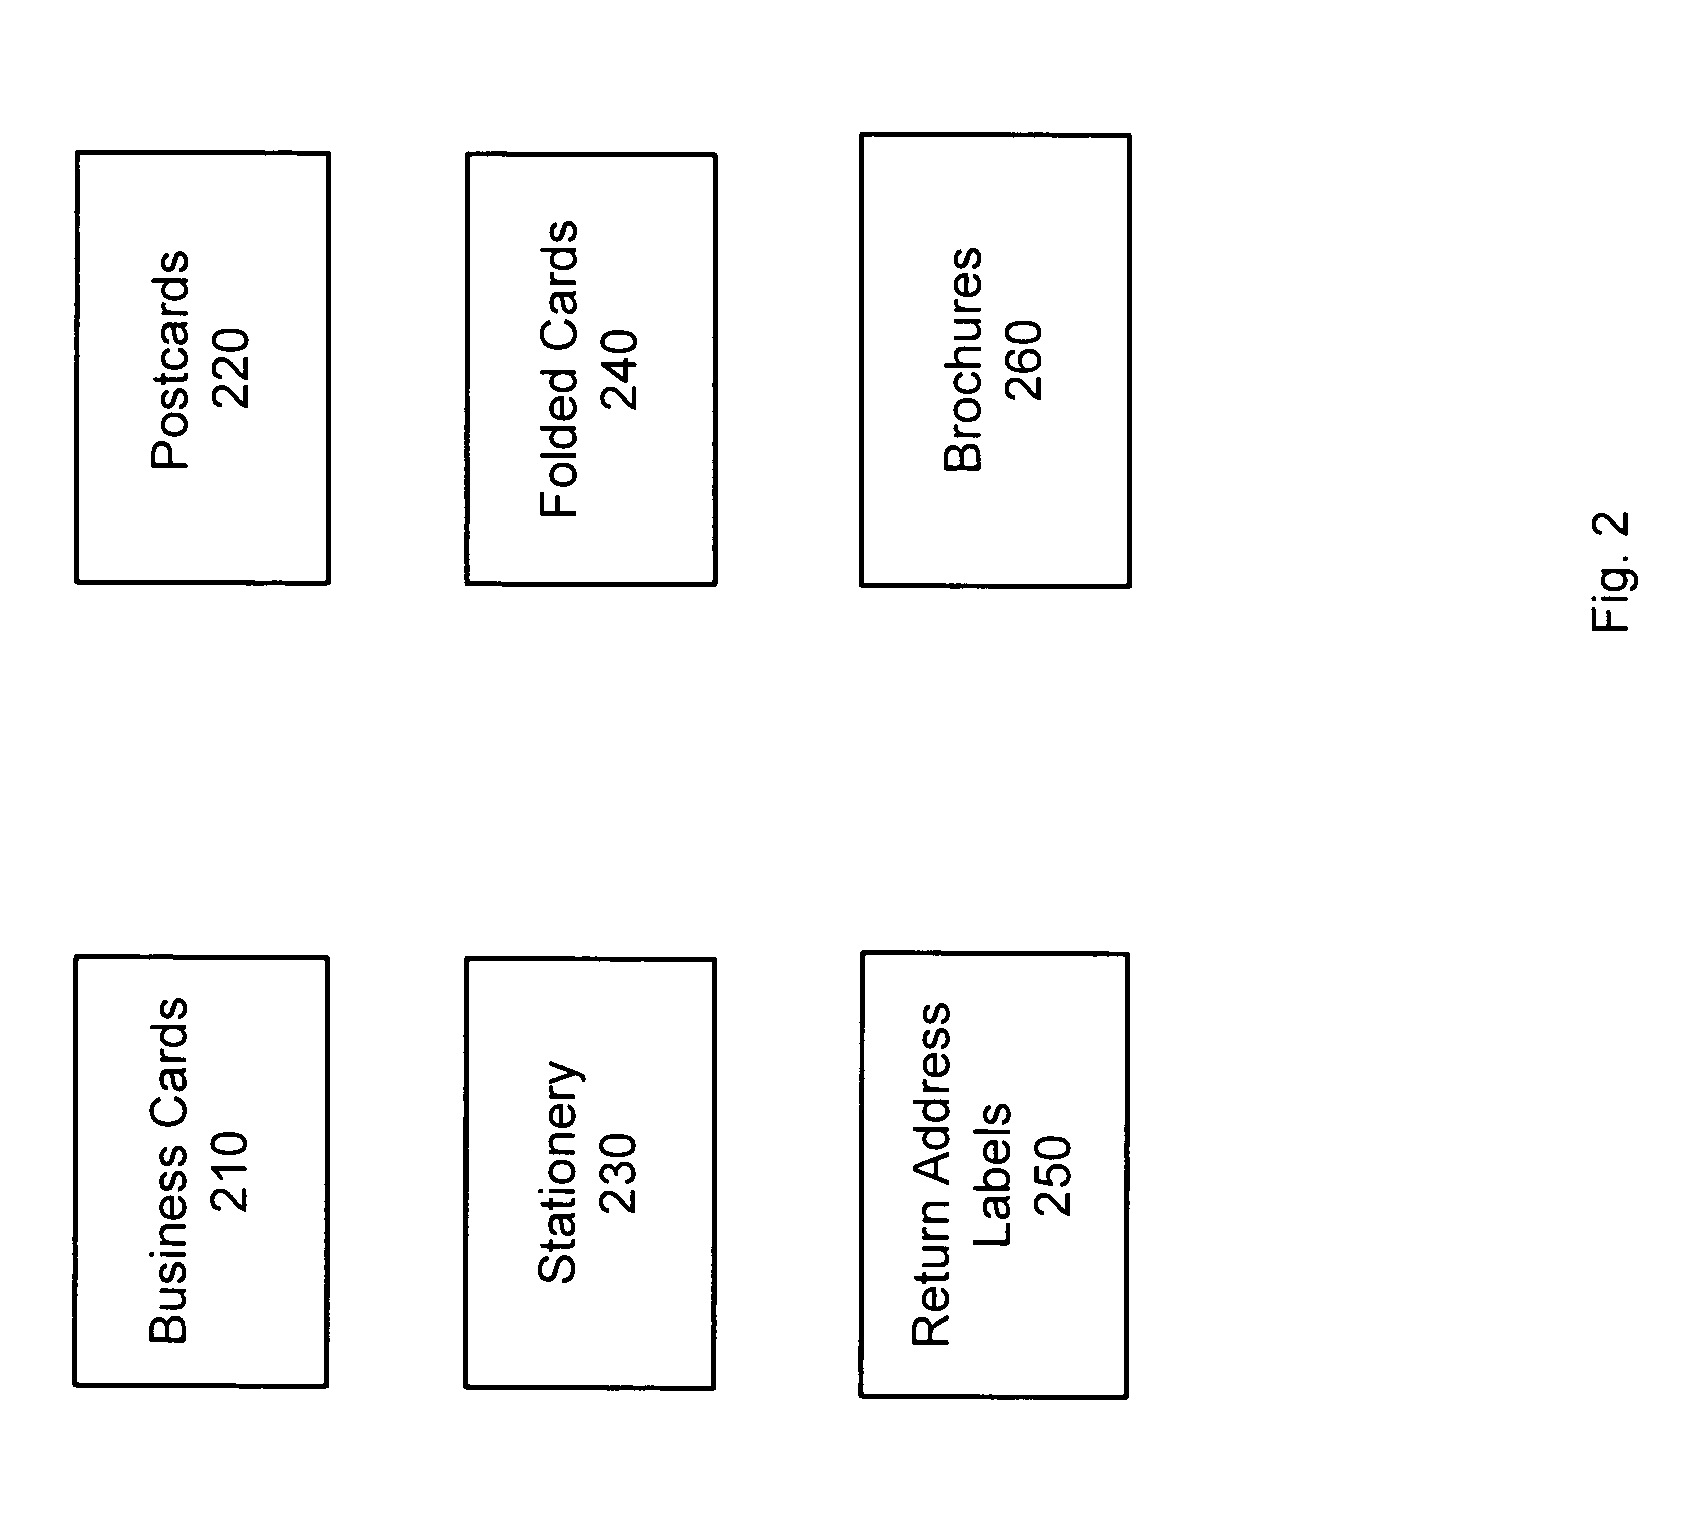 Image cropping system and method